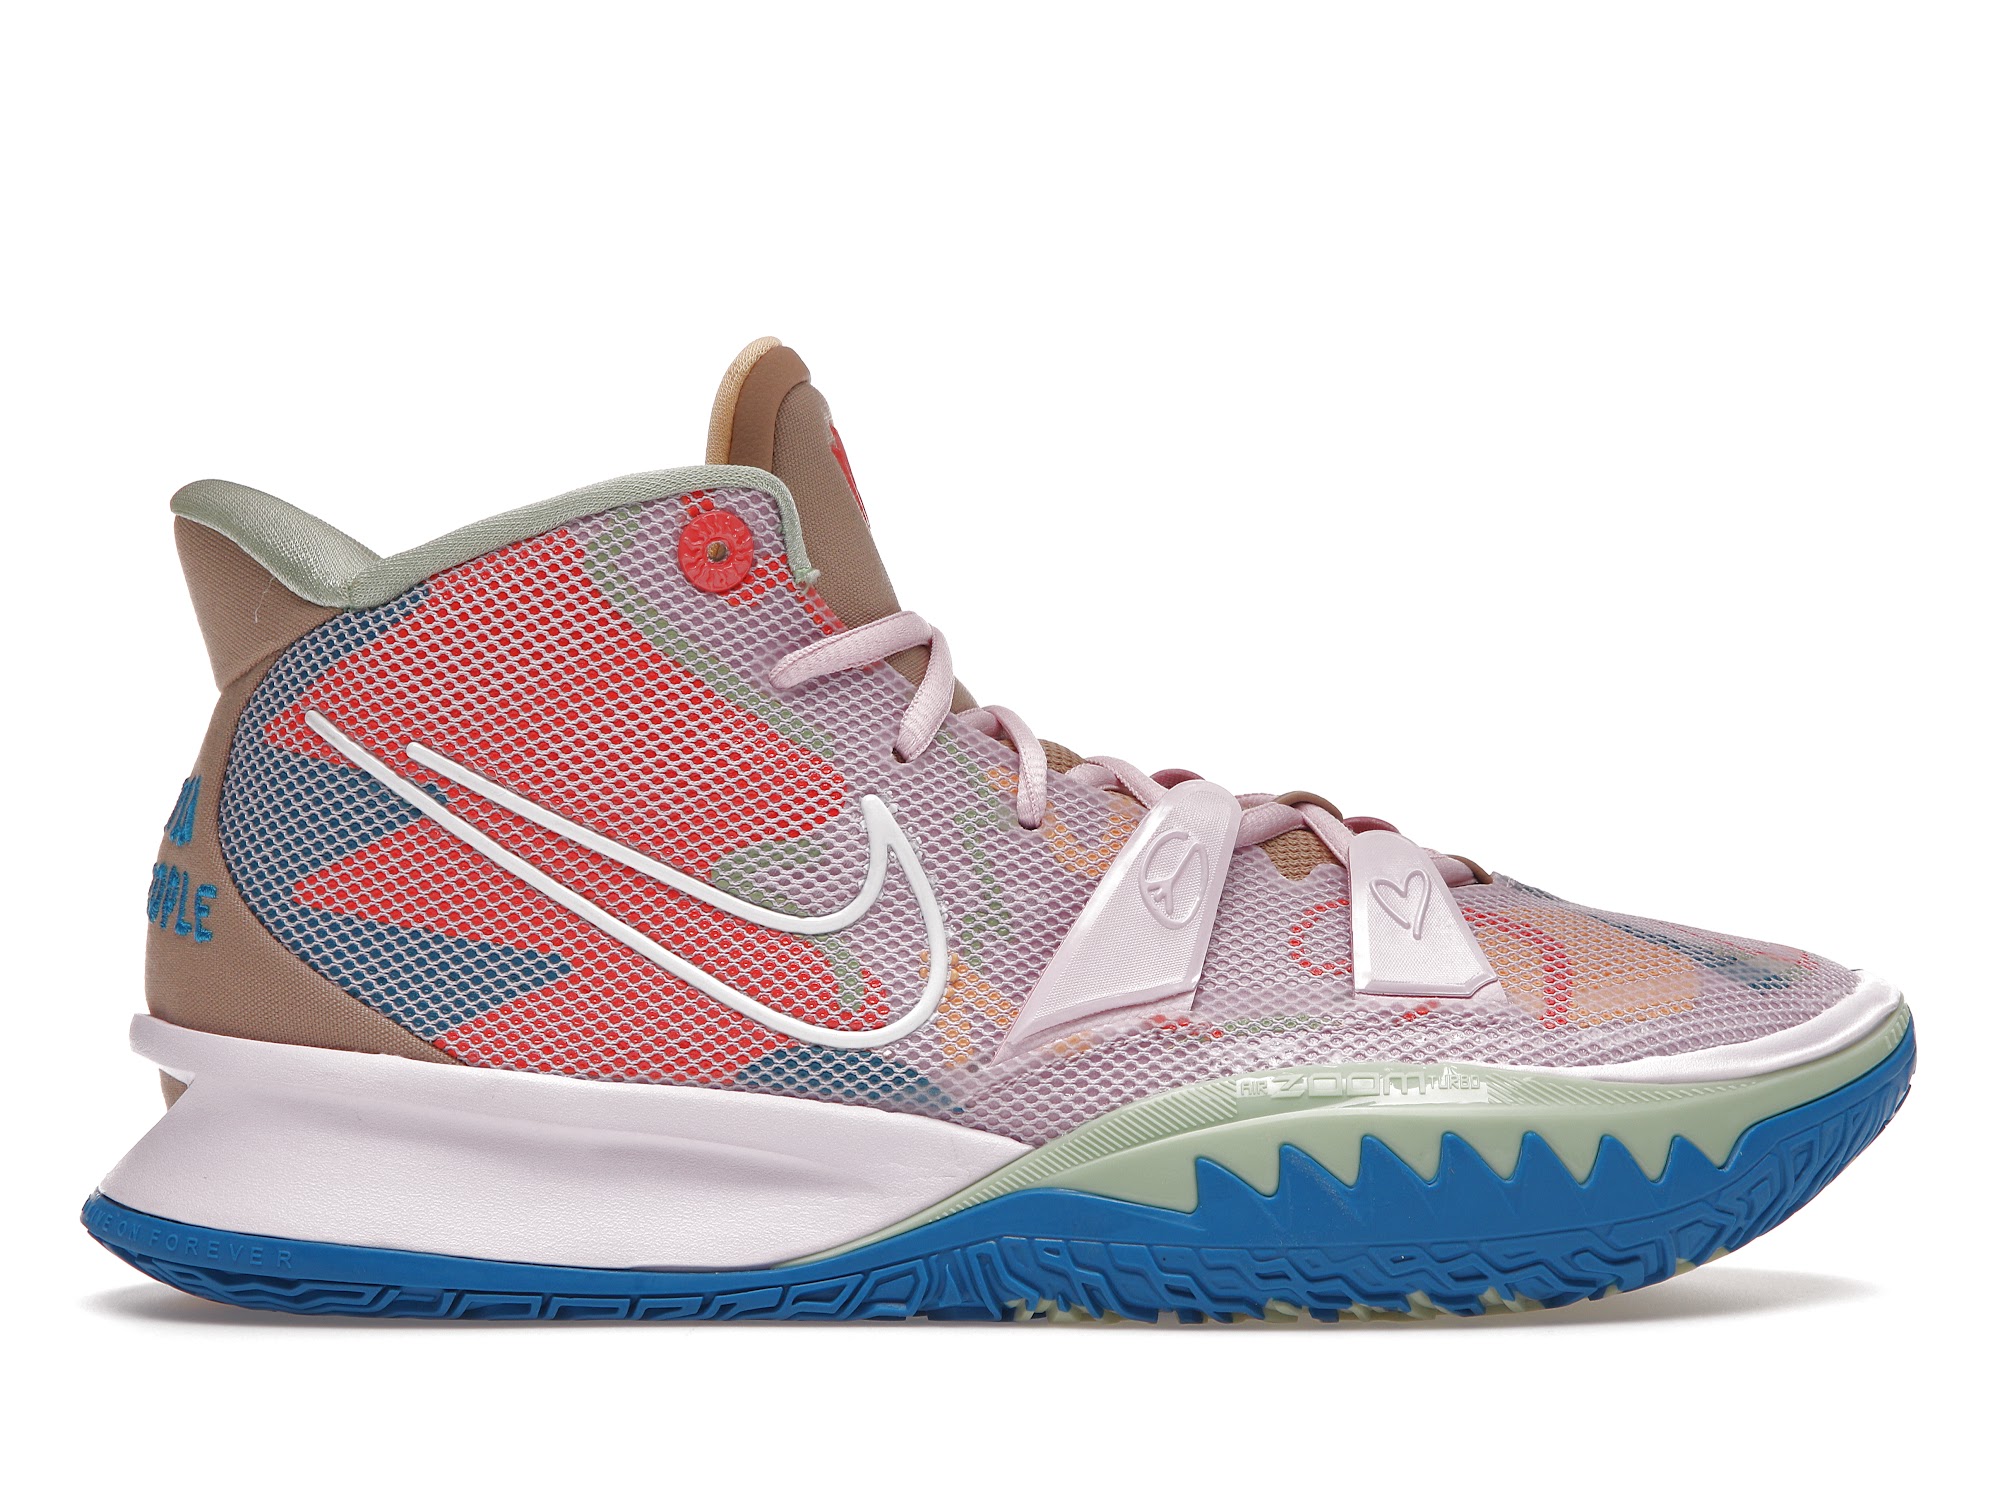 Nike Kyrie 7 1 World 1 People Pink Men's - CQ9326-600/CQ9327-600 - US